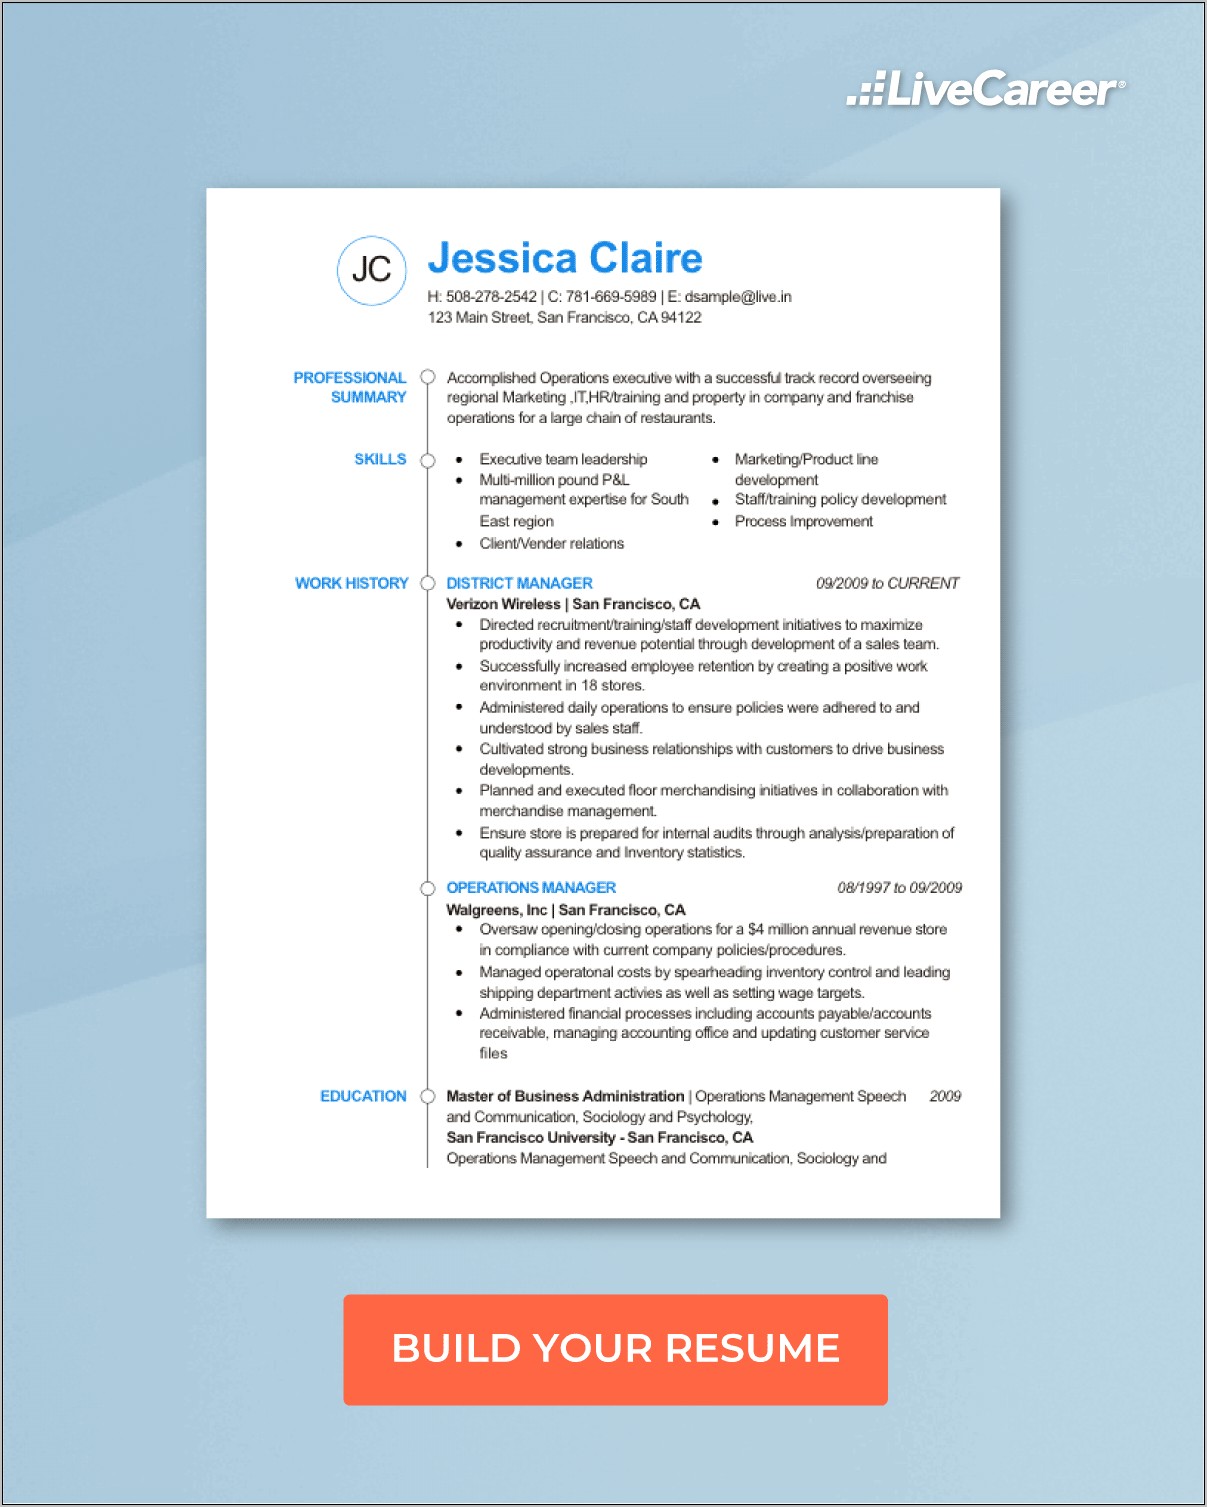 Call Center Resume Objectives Resume Sample Livecareerlivecareer